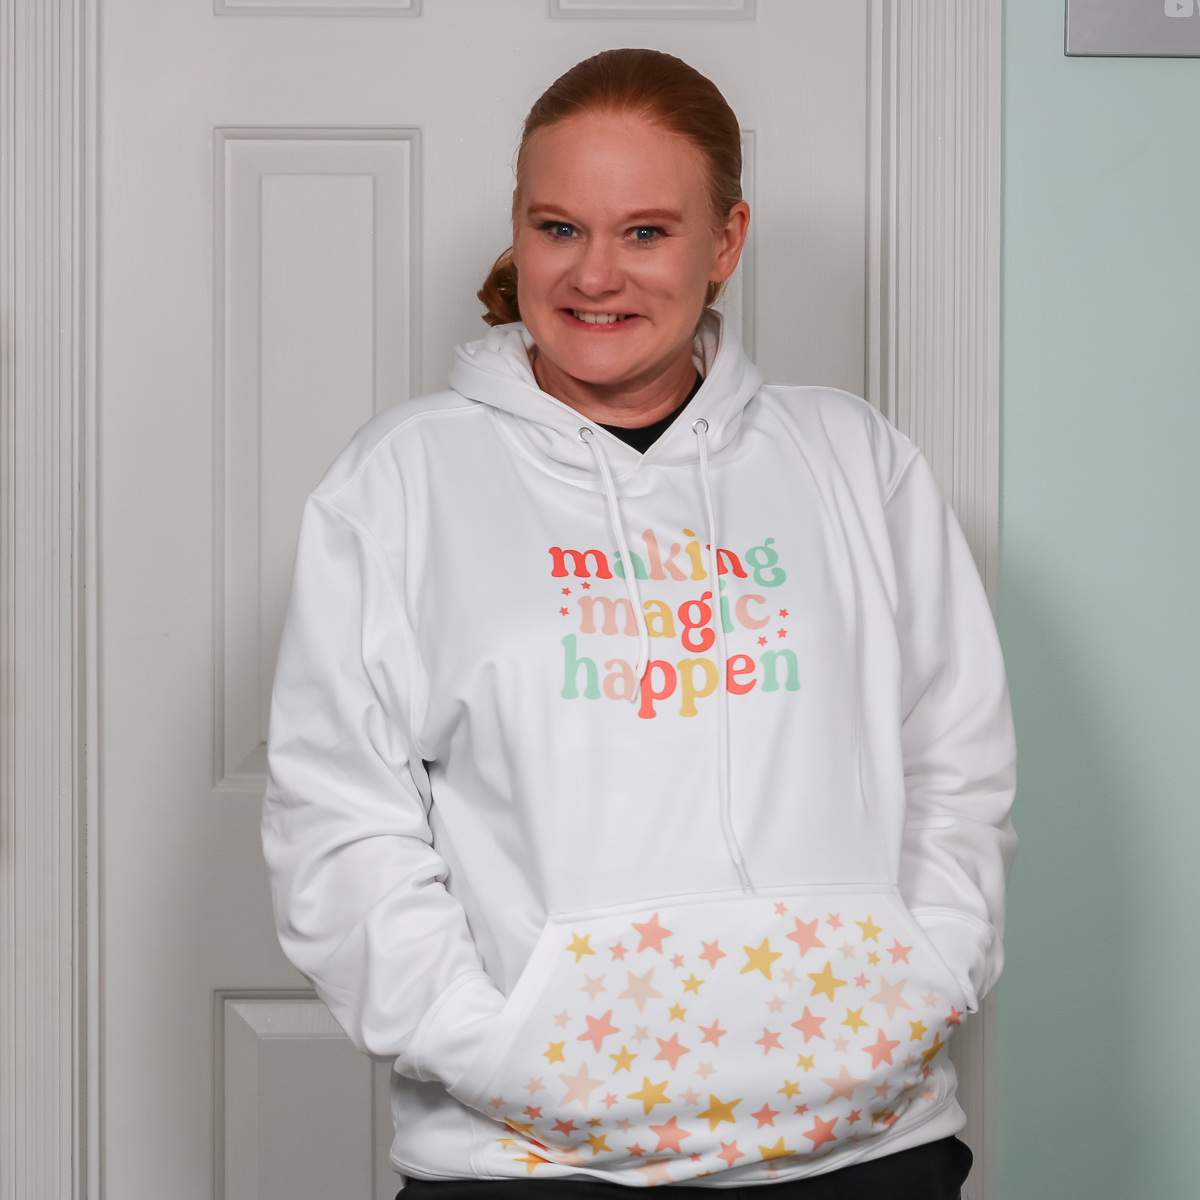 How to Make Sublimation Hoodies for Fall - Angie Holden